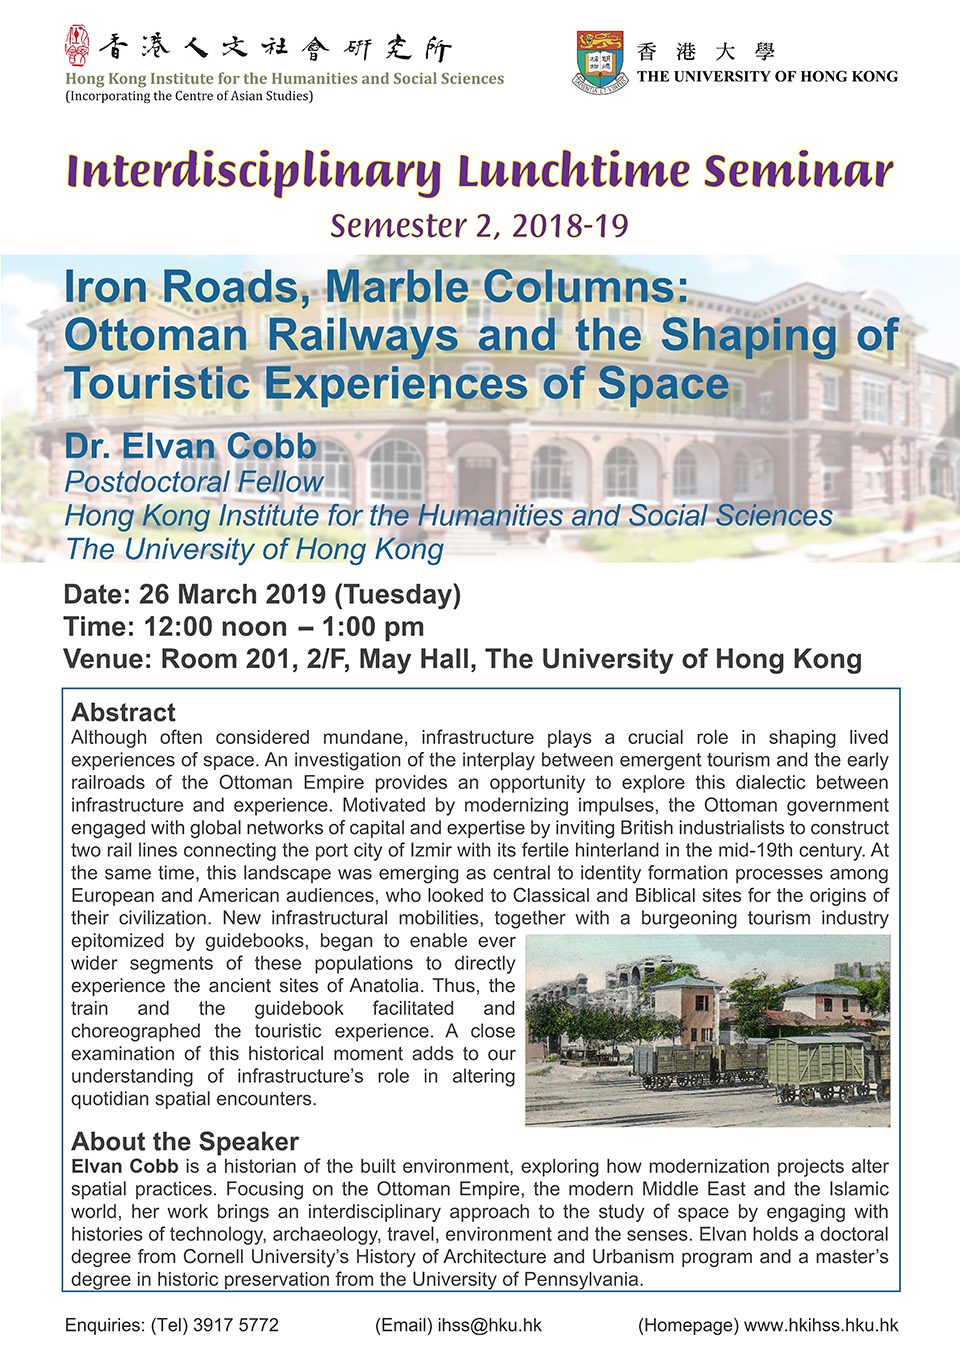 Interdisciplinary Lunchtime Seminar on “Iron Roads, Marble Columns: Ottoman Railways and the Shaping of Touristic Experiences of Space” by Dr. Elvan Cobb (March 26, 2019)